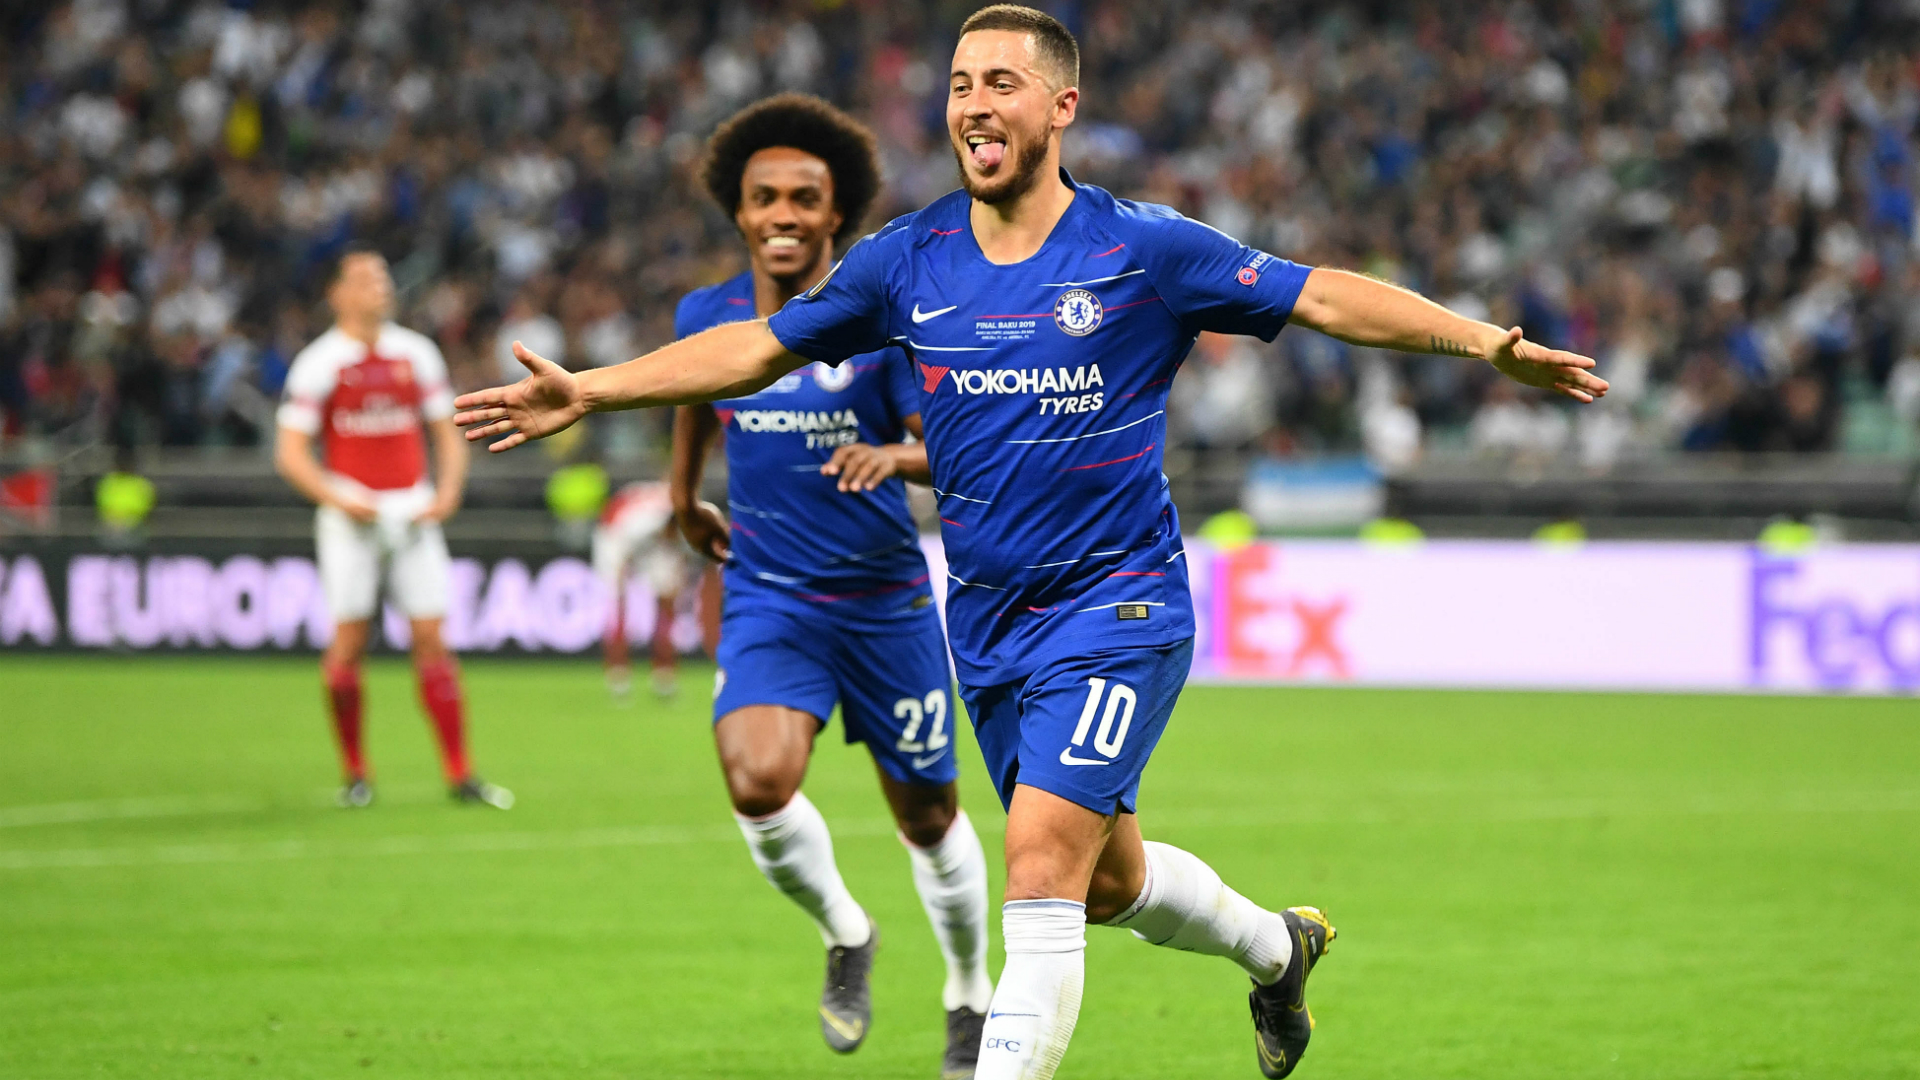 Kante: Chelsea can only wish 'amazing' Hazard the best